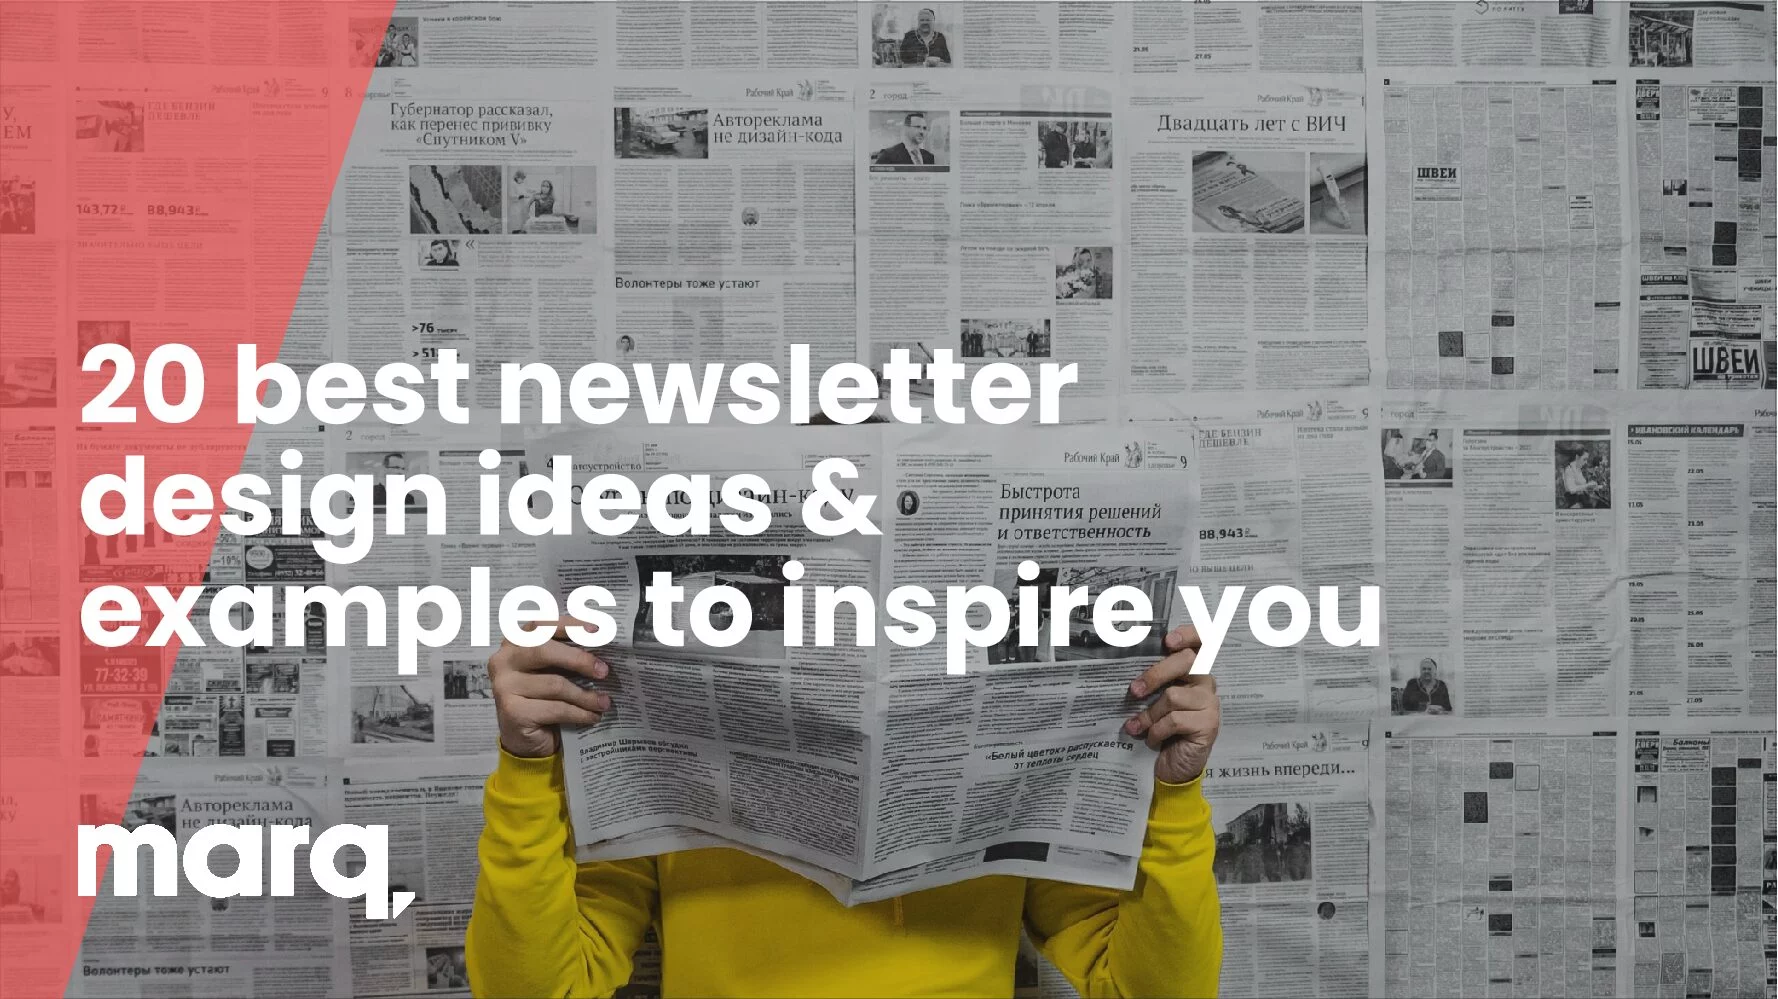 20 best newsletter design ideas & examples to inspire you